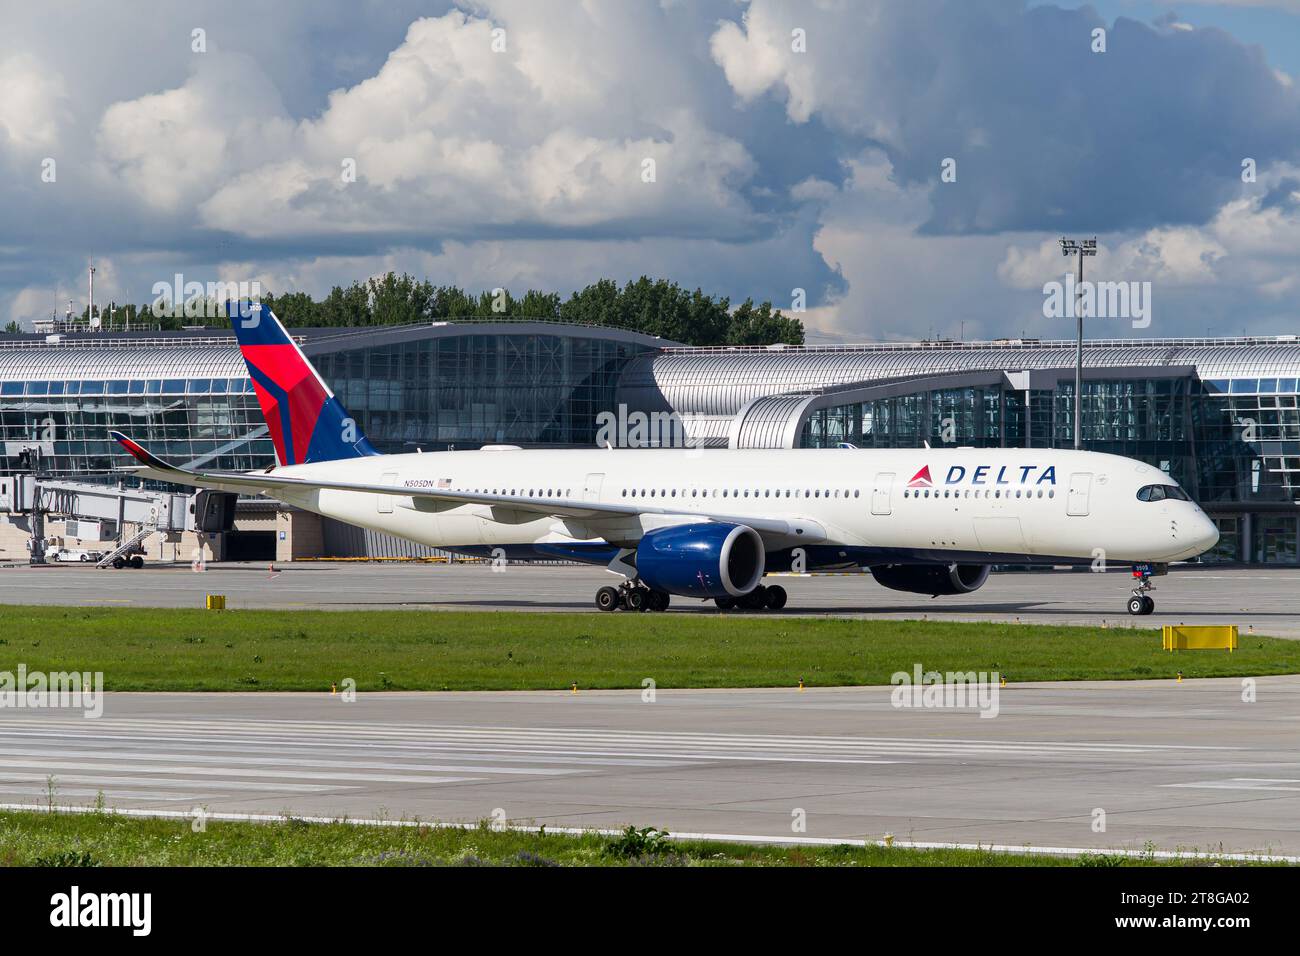 Delta Air Lines A350-900 standing on apron Bravo in Lviv Airport. High-quality photo Stock Photo